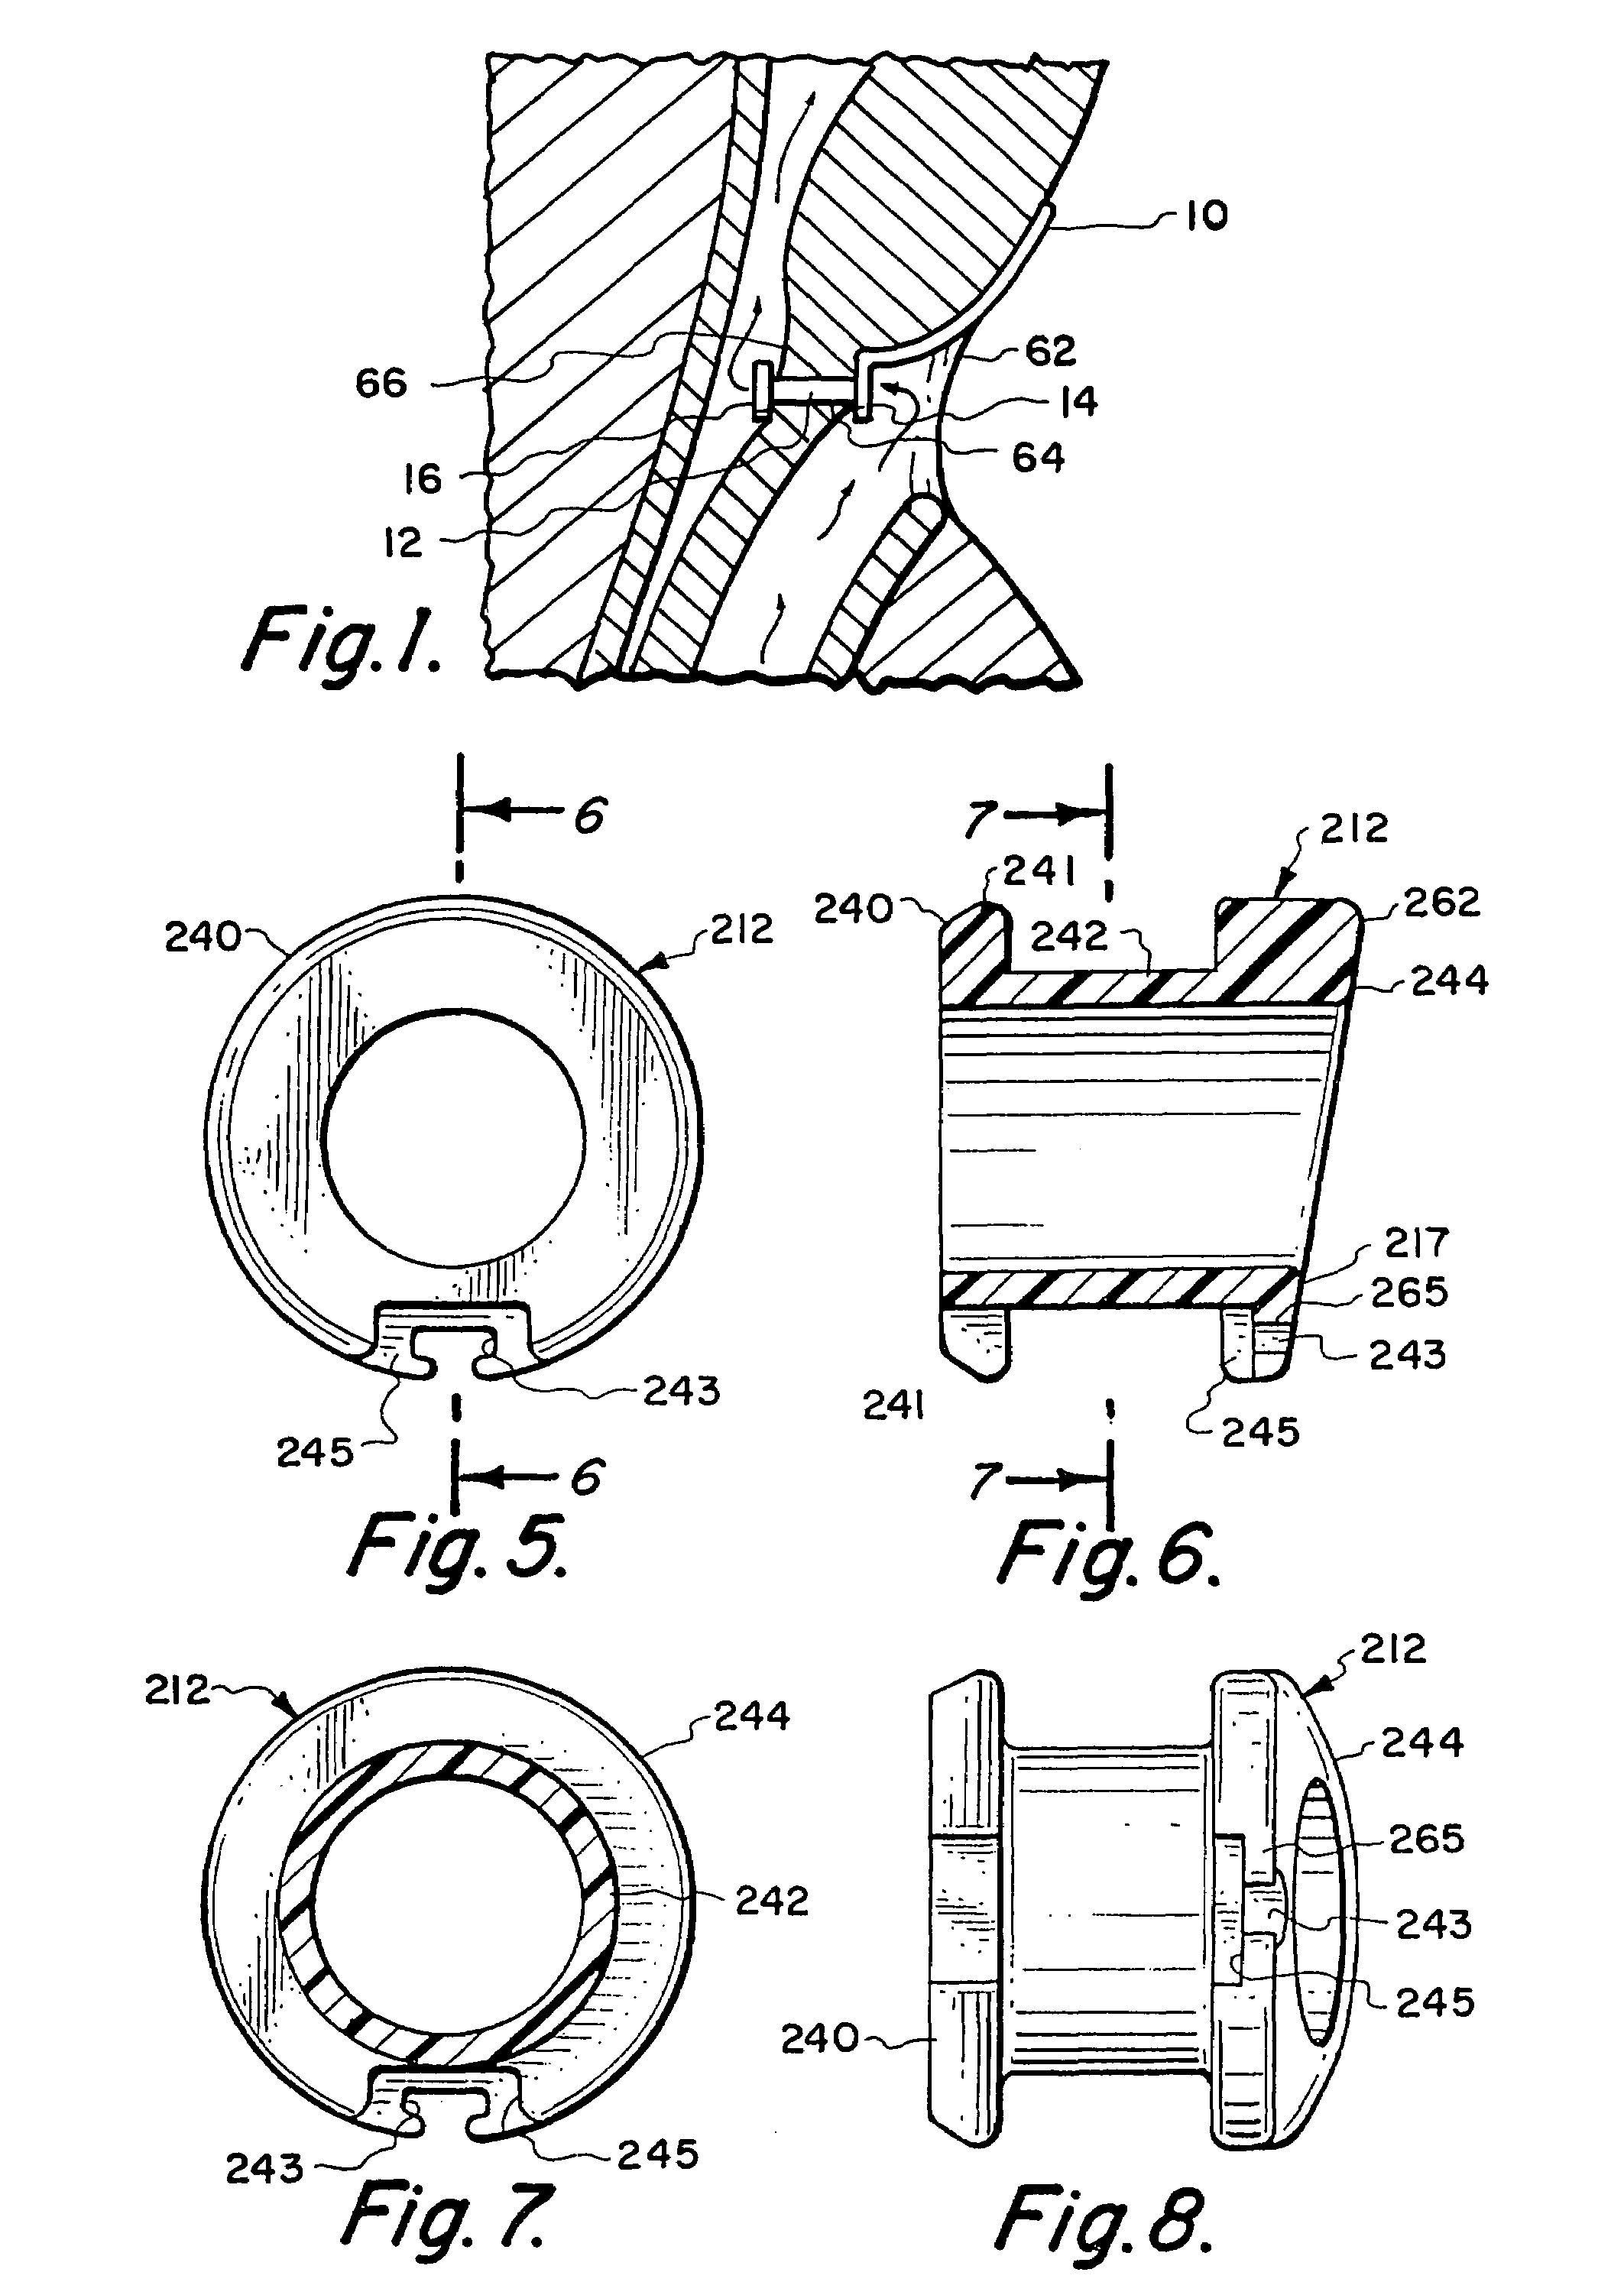 Medical devices having antimicrobial properties